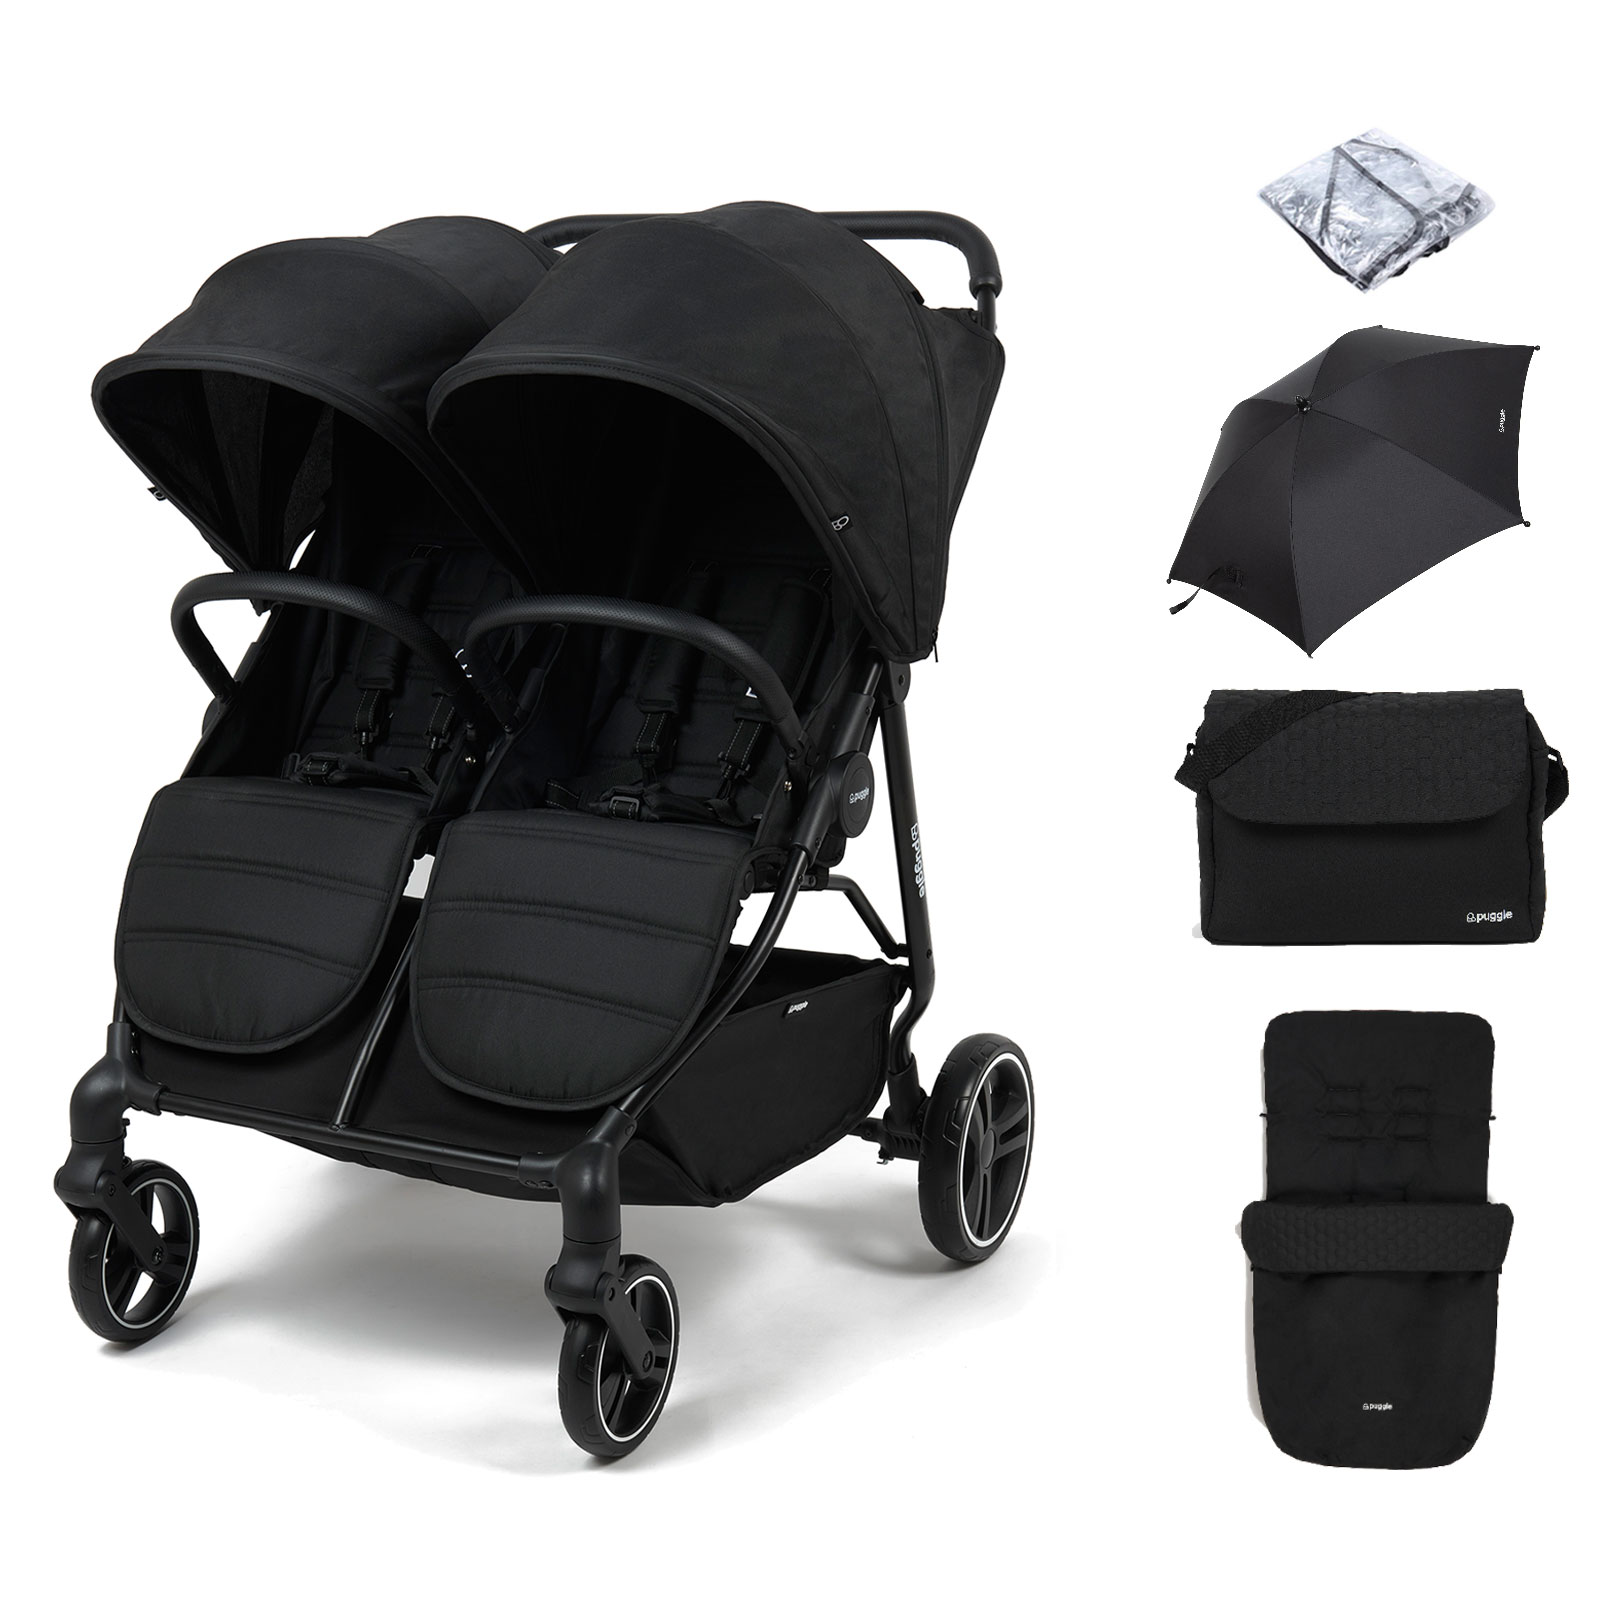 Puggle Urban City Easyfold Twin Pushchair with Footmuff, Parasol & Changing Bag – Storm Black